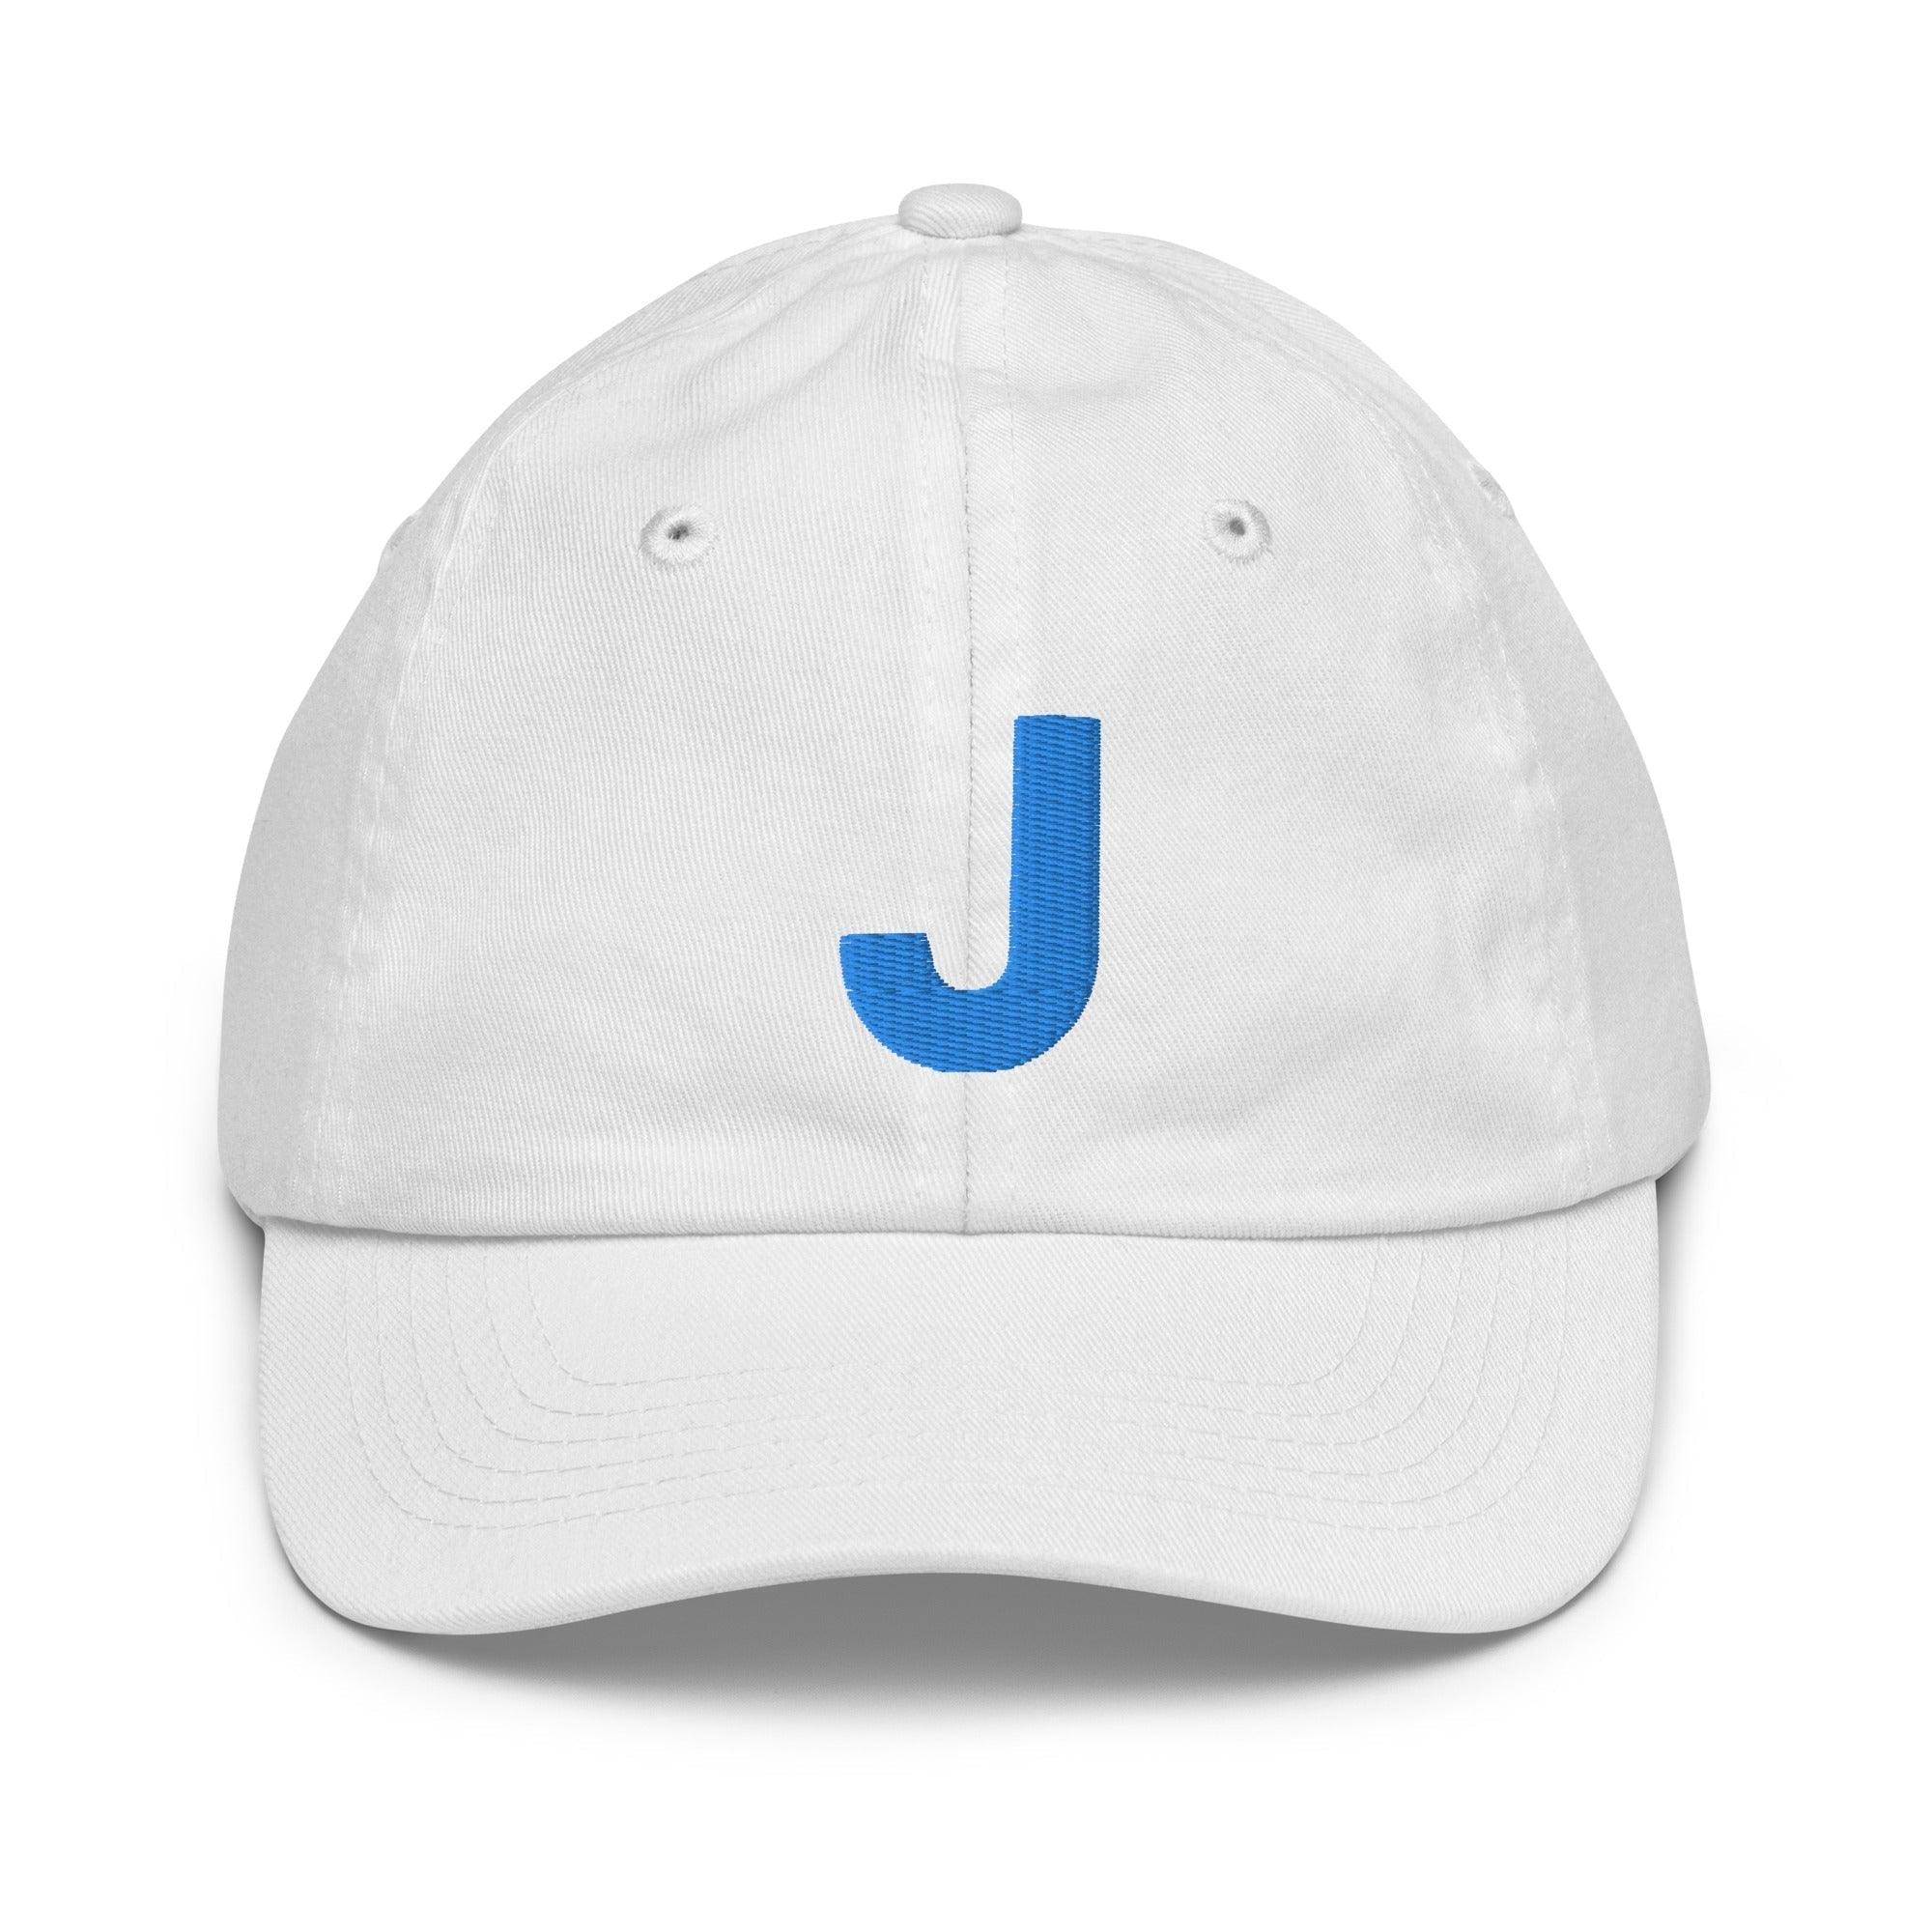 Monogram Embroidered Dad Hat for Kids - Personalized! Polychrome Goods